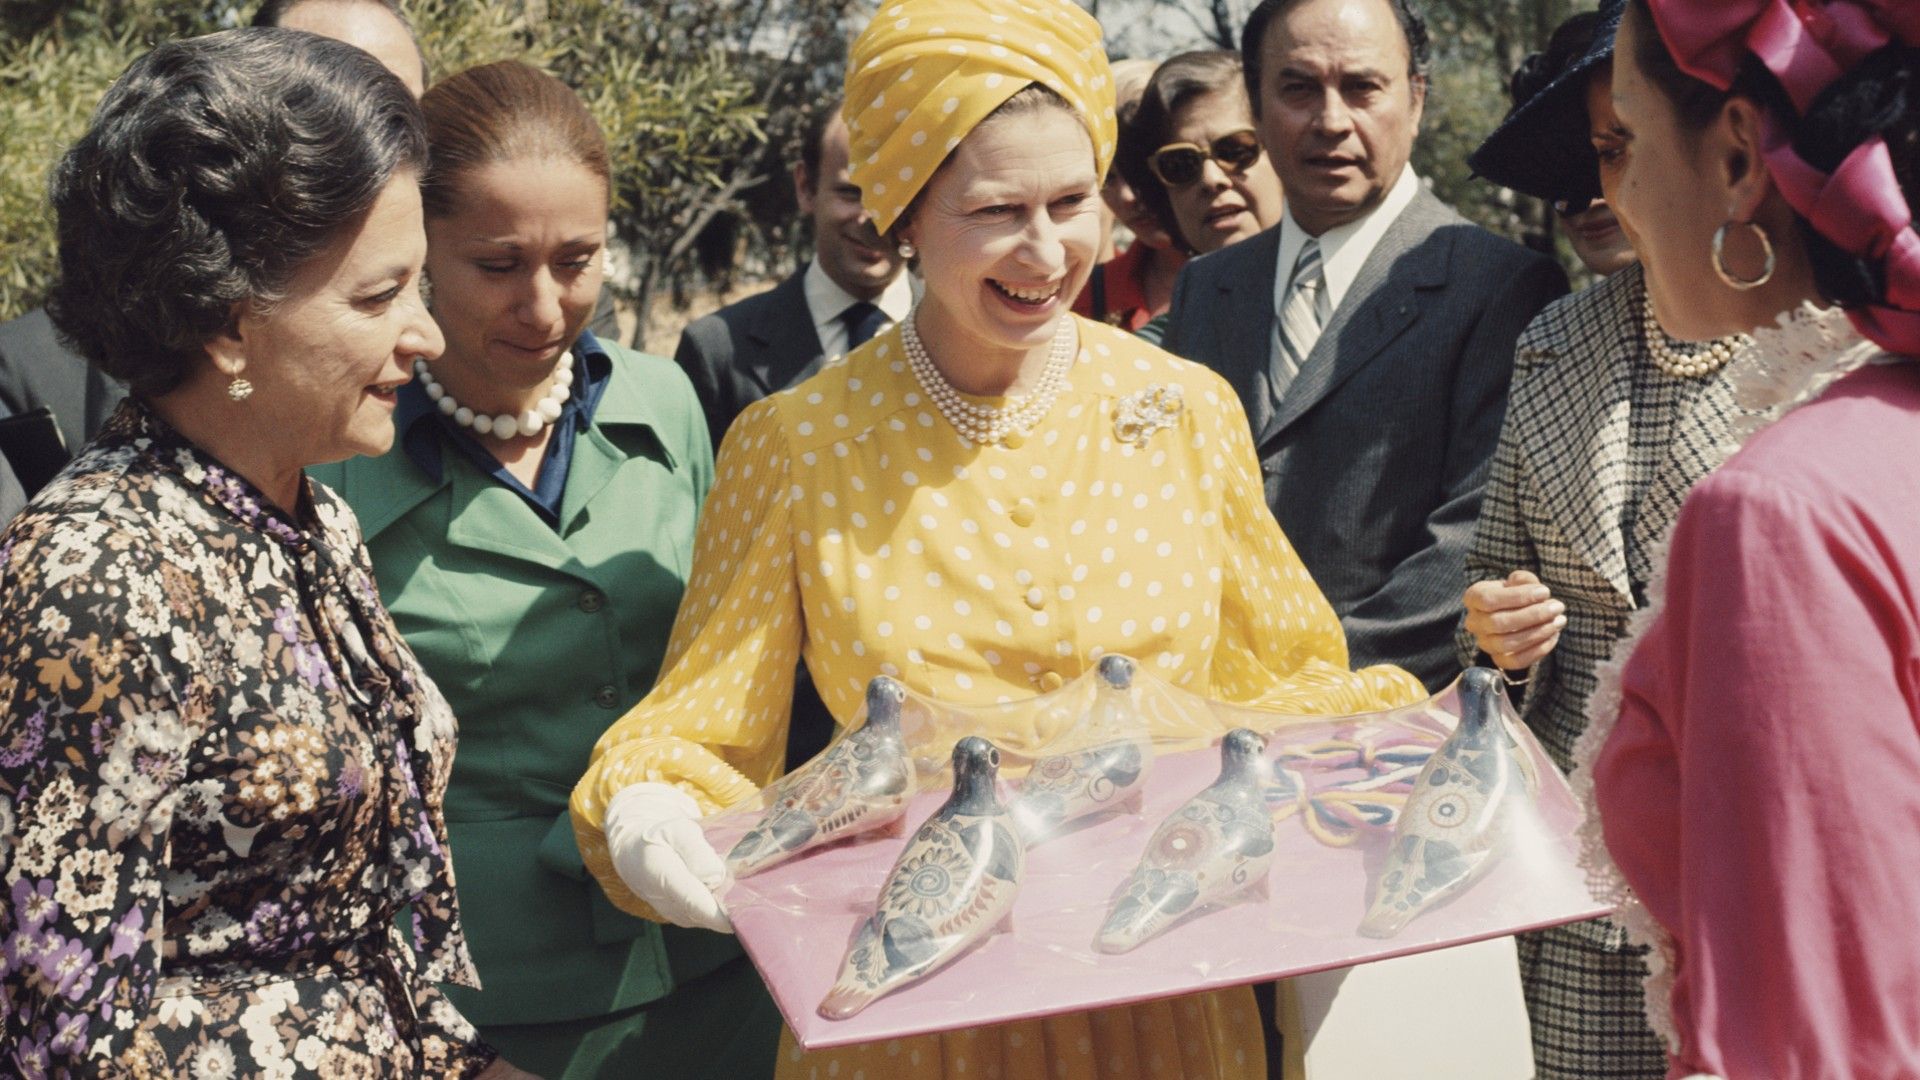 <p>                     The Queen made two trips to Mexico during her reign, and the first took place in 1975. She toured across Yucatán, Mexico City, Oaxaca, Guanajuato and Veracruz in the space of a week, and took in a whole range of sights and activities during that time.                   </p>                                      <p>                     She and Philip arrived on the royal yacht and headed straight to Mexico City. Whilst there, they had a meeting with former President Luis Echeverría and his wife, María, before heading to Oaxaca city. While there, they spent some time in the local markets being shown creations from locals. It’s even reported that they purchased a few items themselves!                   </p>